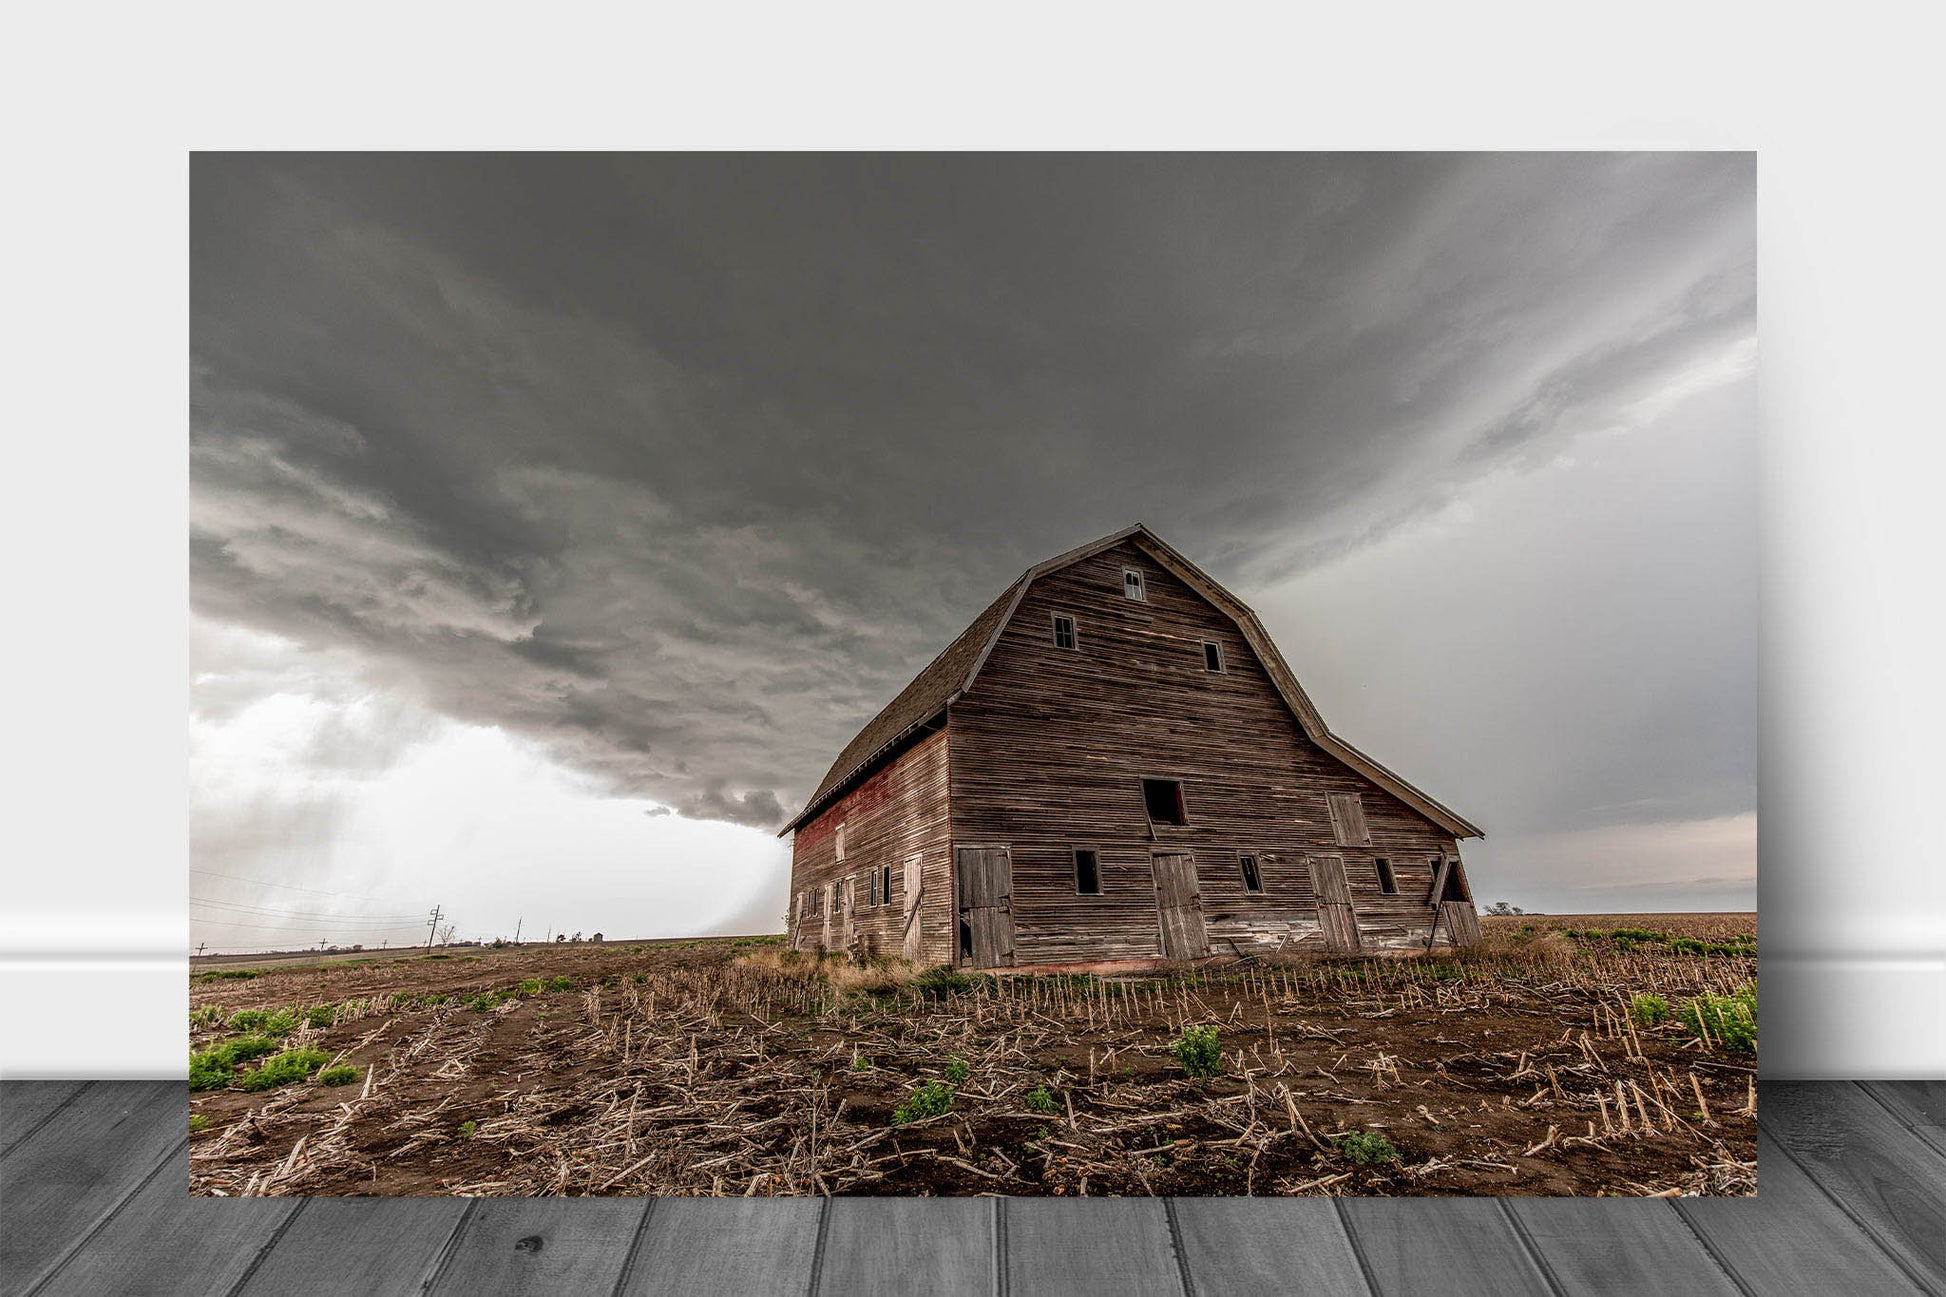 Country aluminum metal print of a storm advancing over an old red Amish style barn in a field on a stormy spring day in Nebraska by Sean Ramsey of Southern Plains Photography.